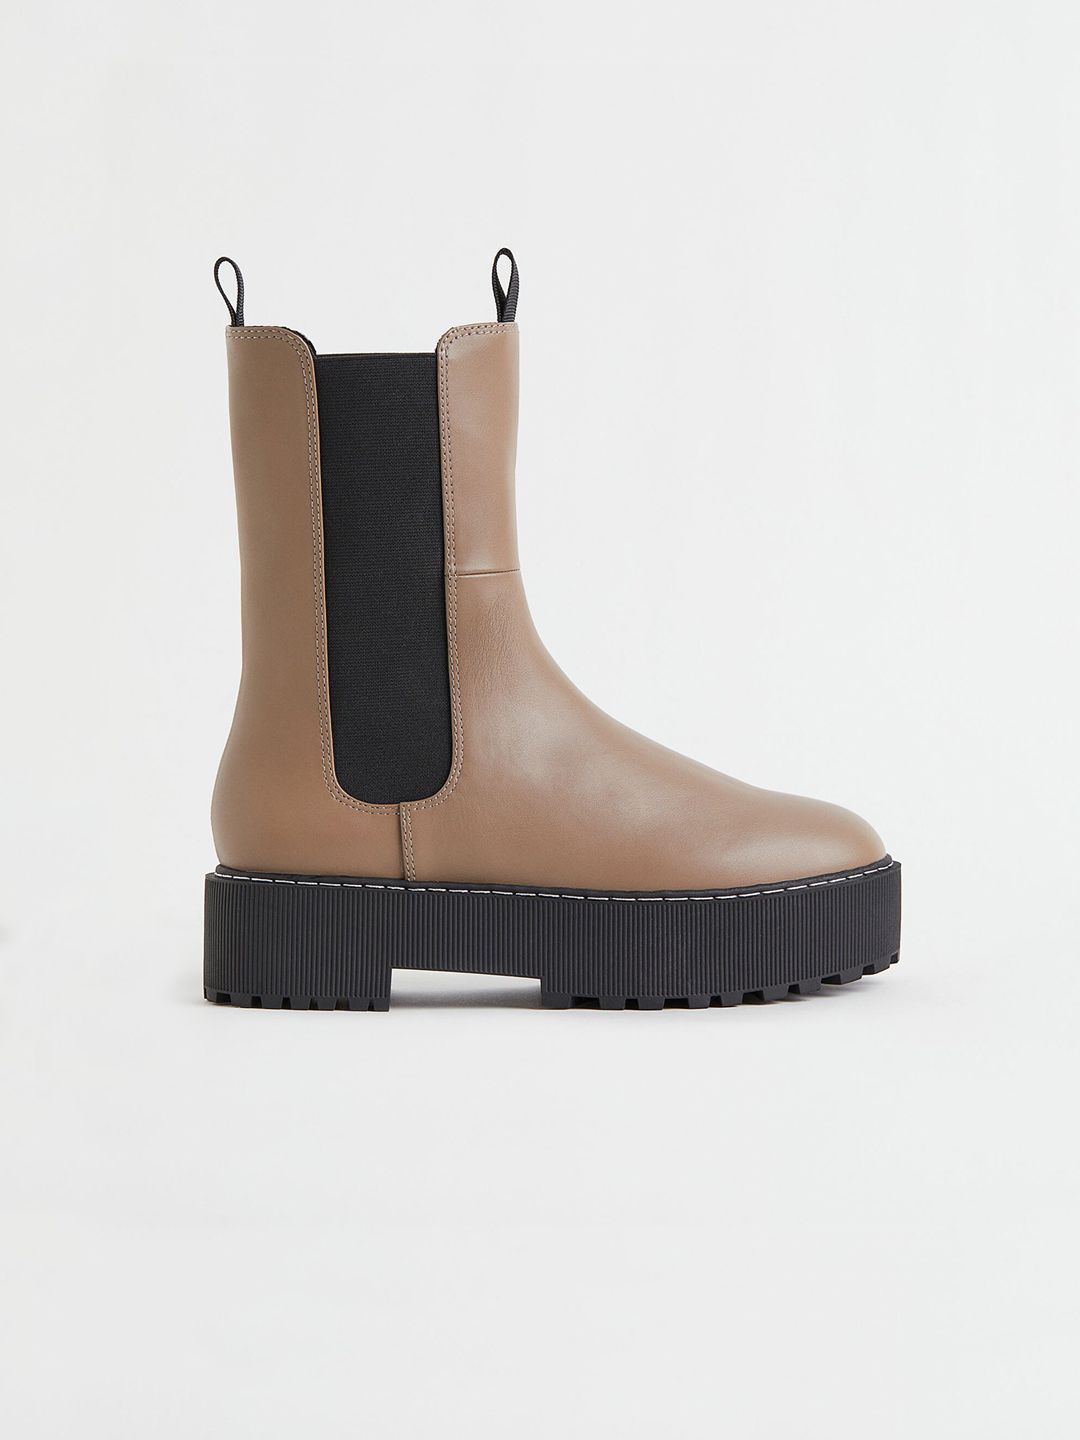 H&M Women Beige & Black Solid High Top Chelsea Boots Price in India